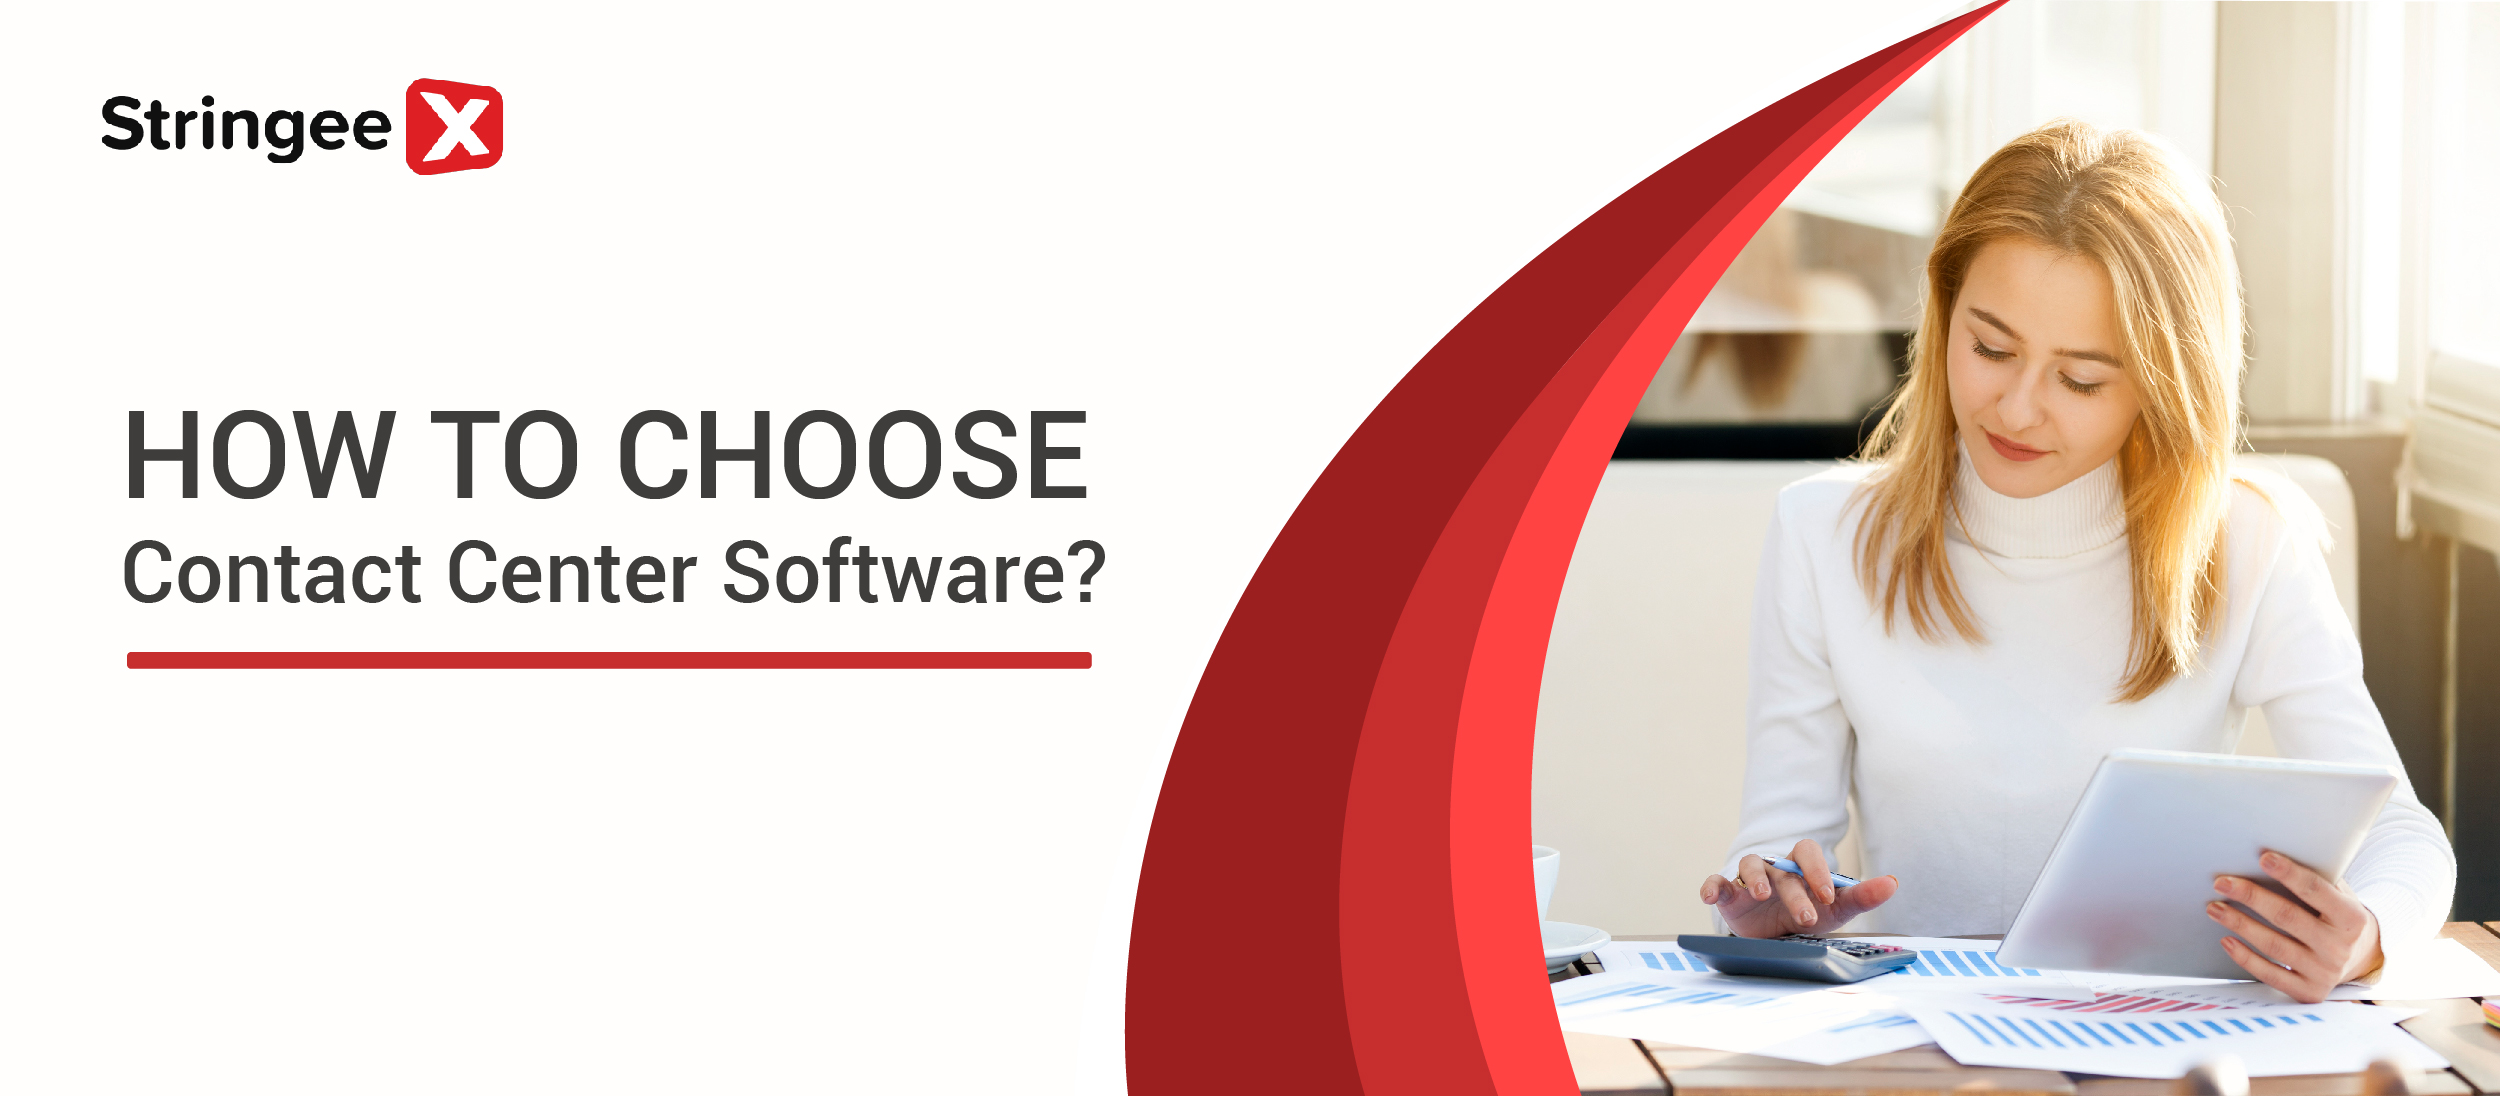 How To Choose Contact Center Software?